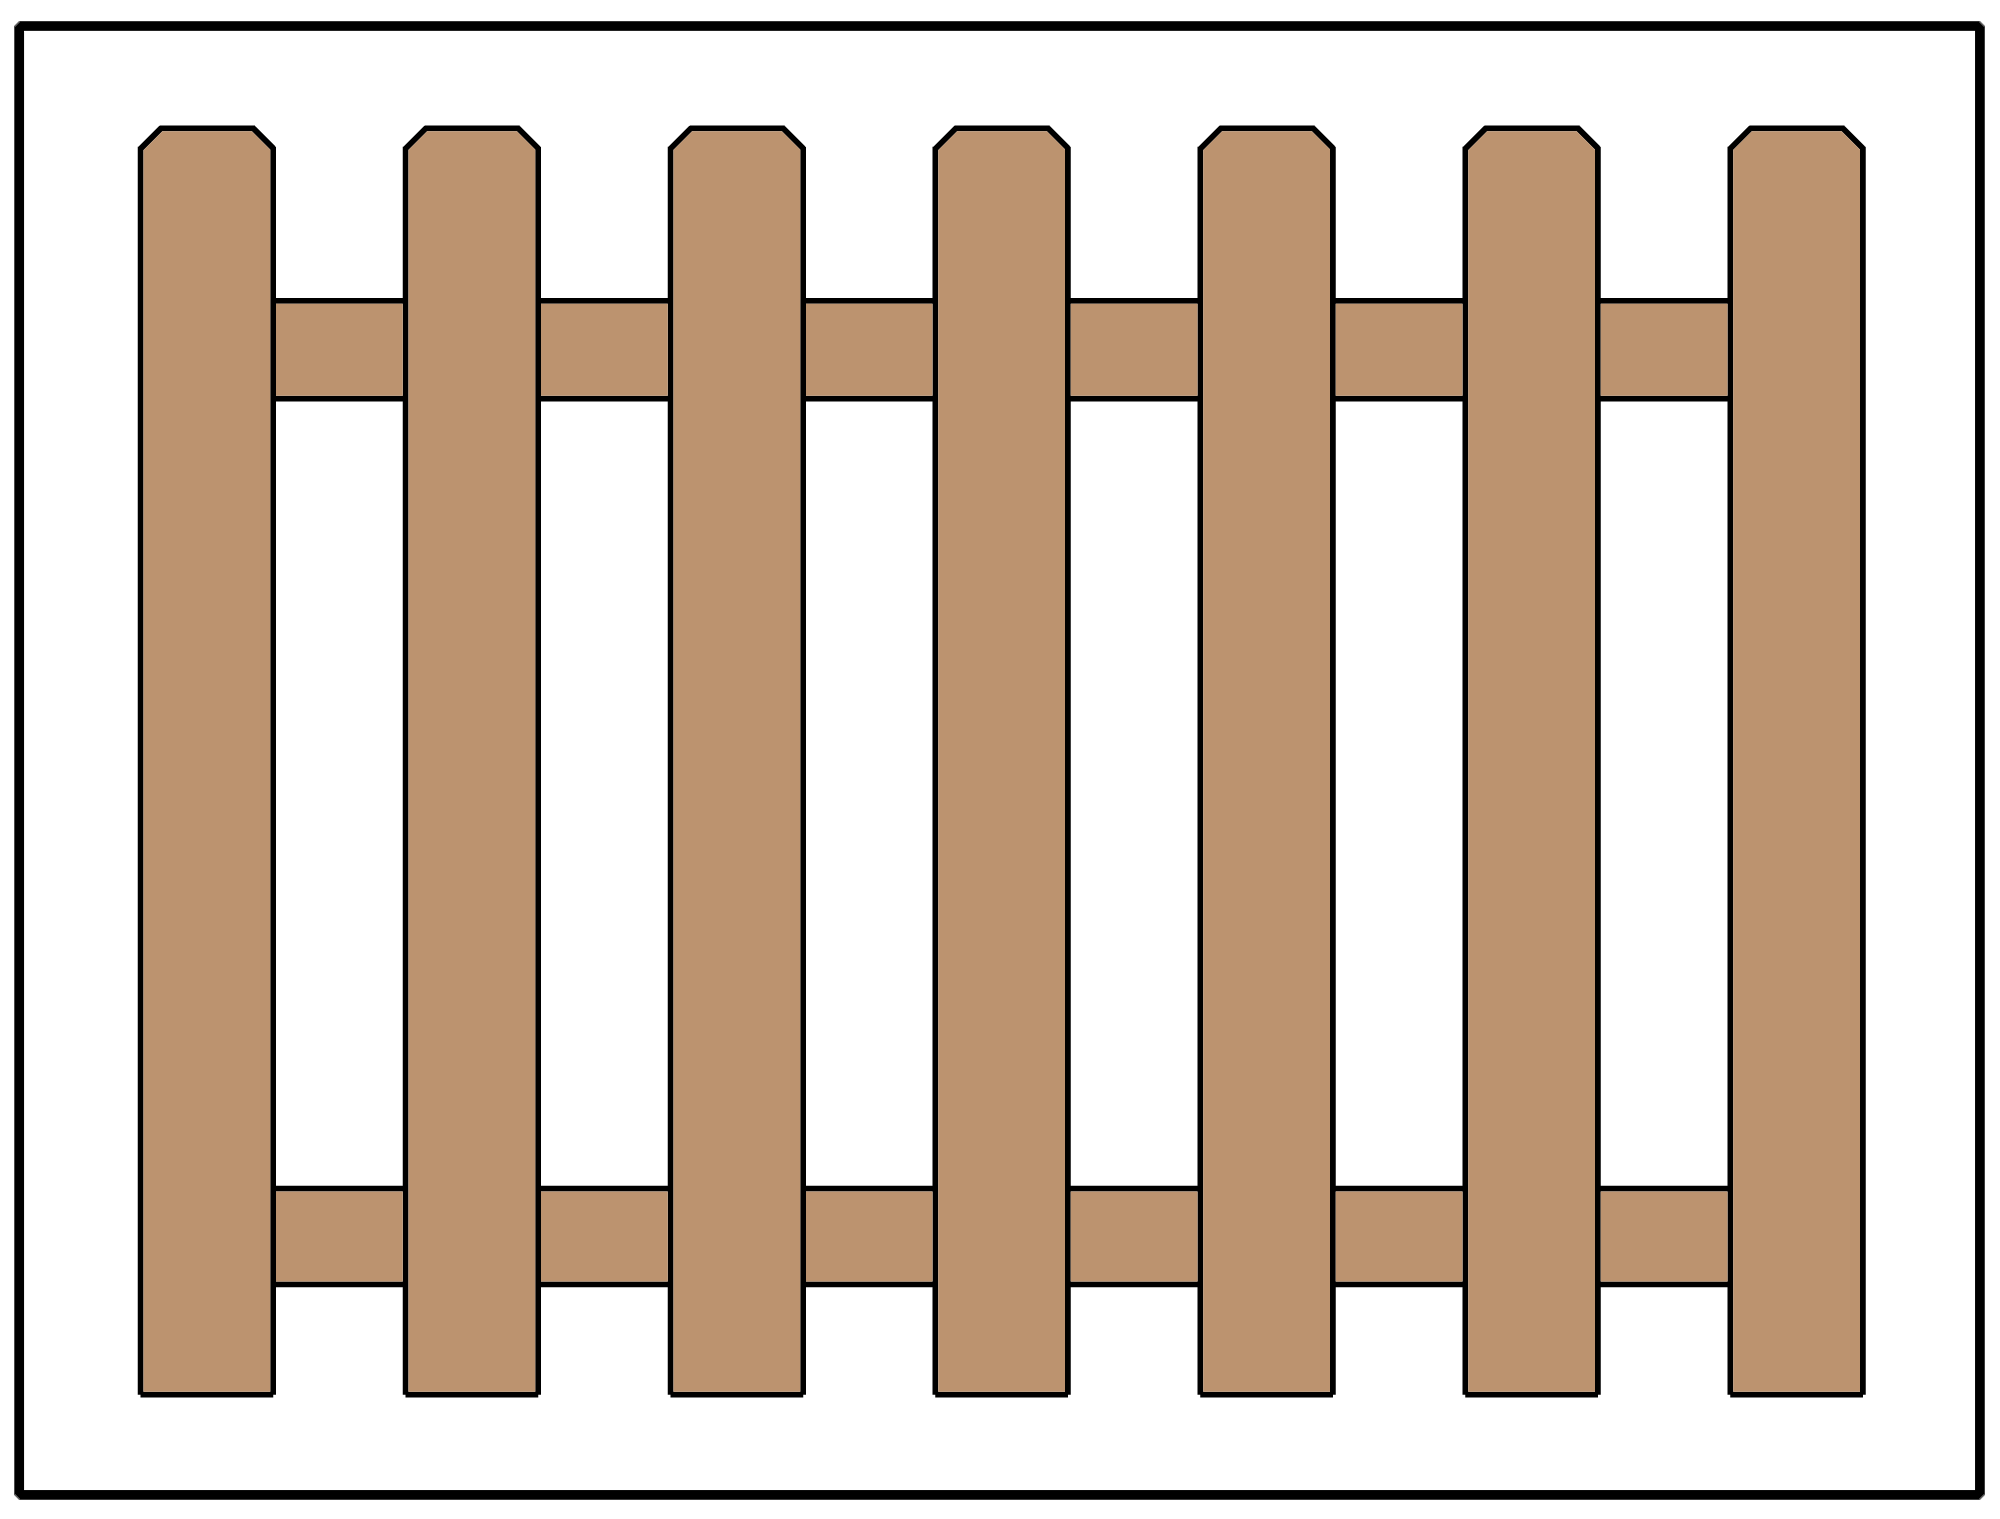 Illustration of a picket fence design using dog ear pickets